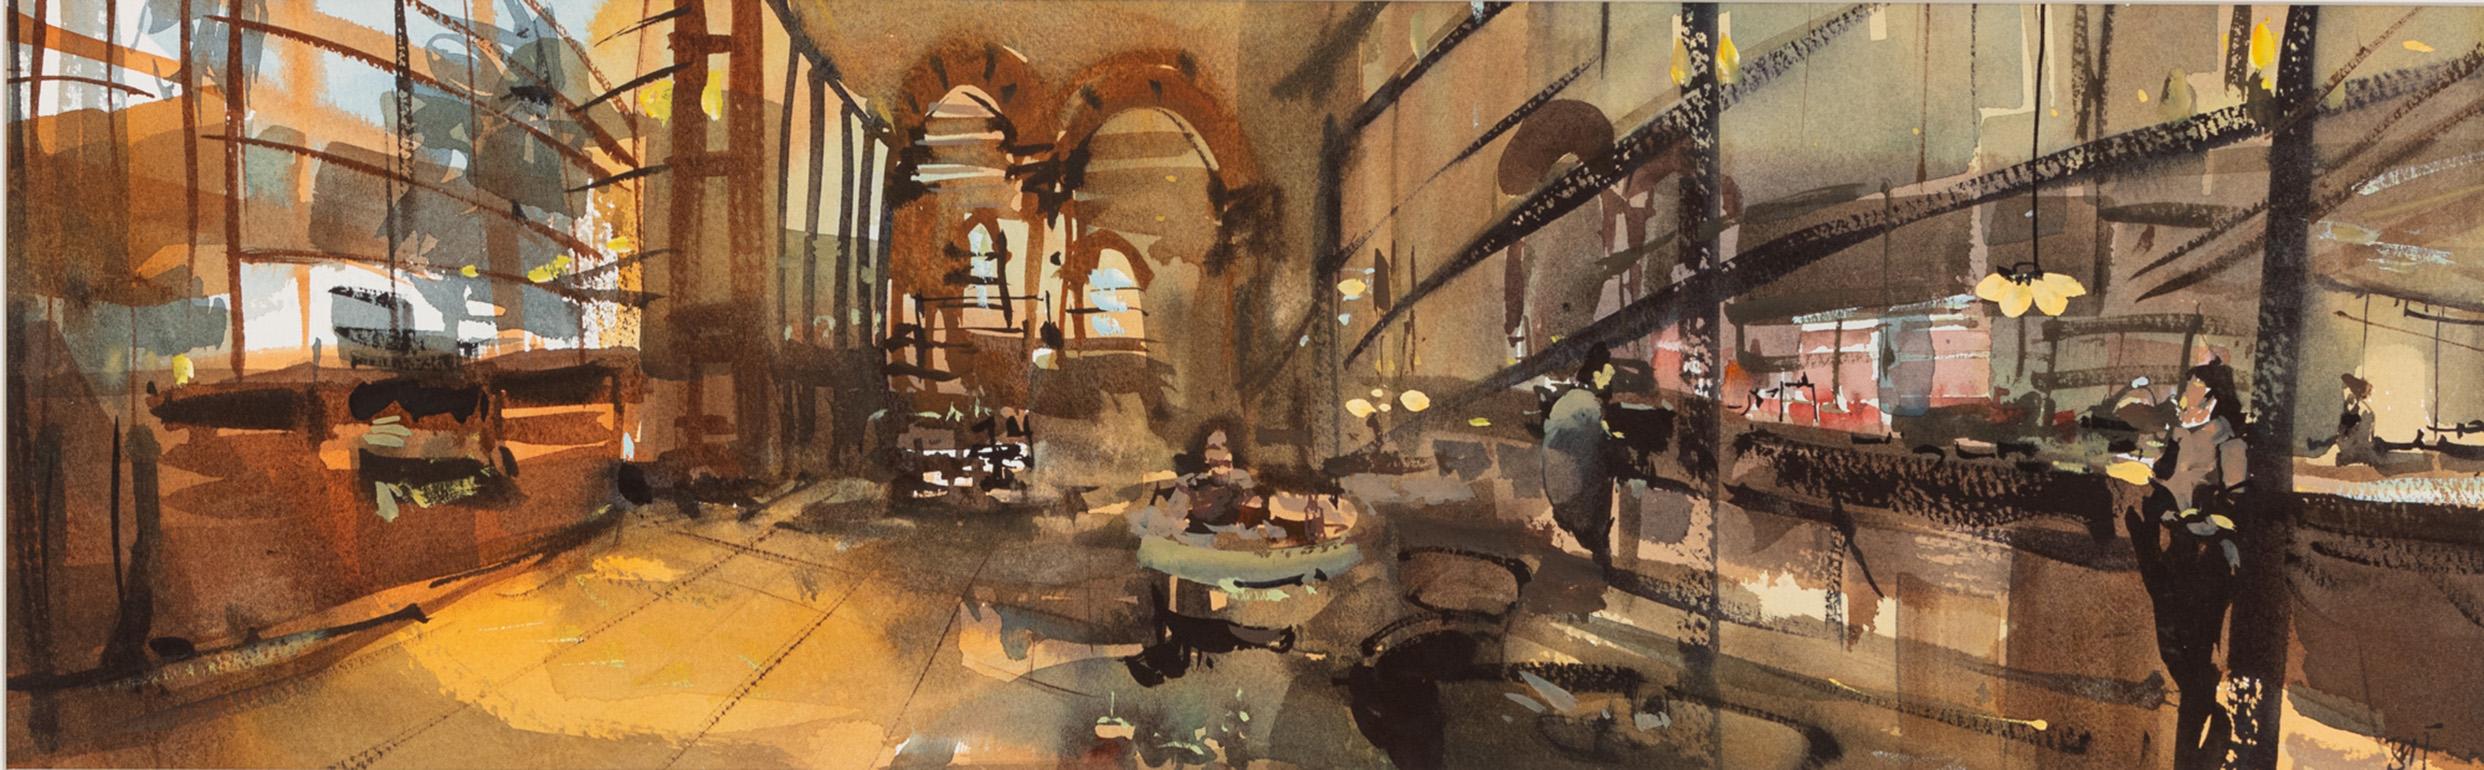 "Breakfast at Tiffany's" A Watercolor Painting of a Café in Mancester, UK